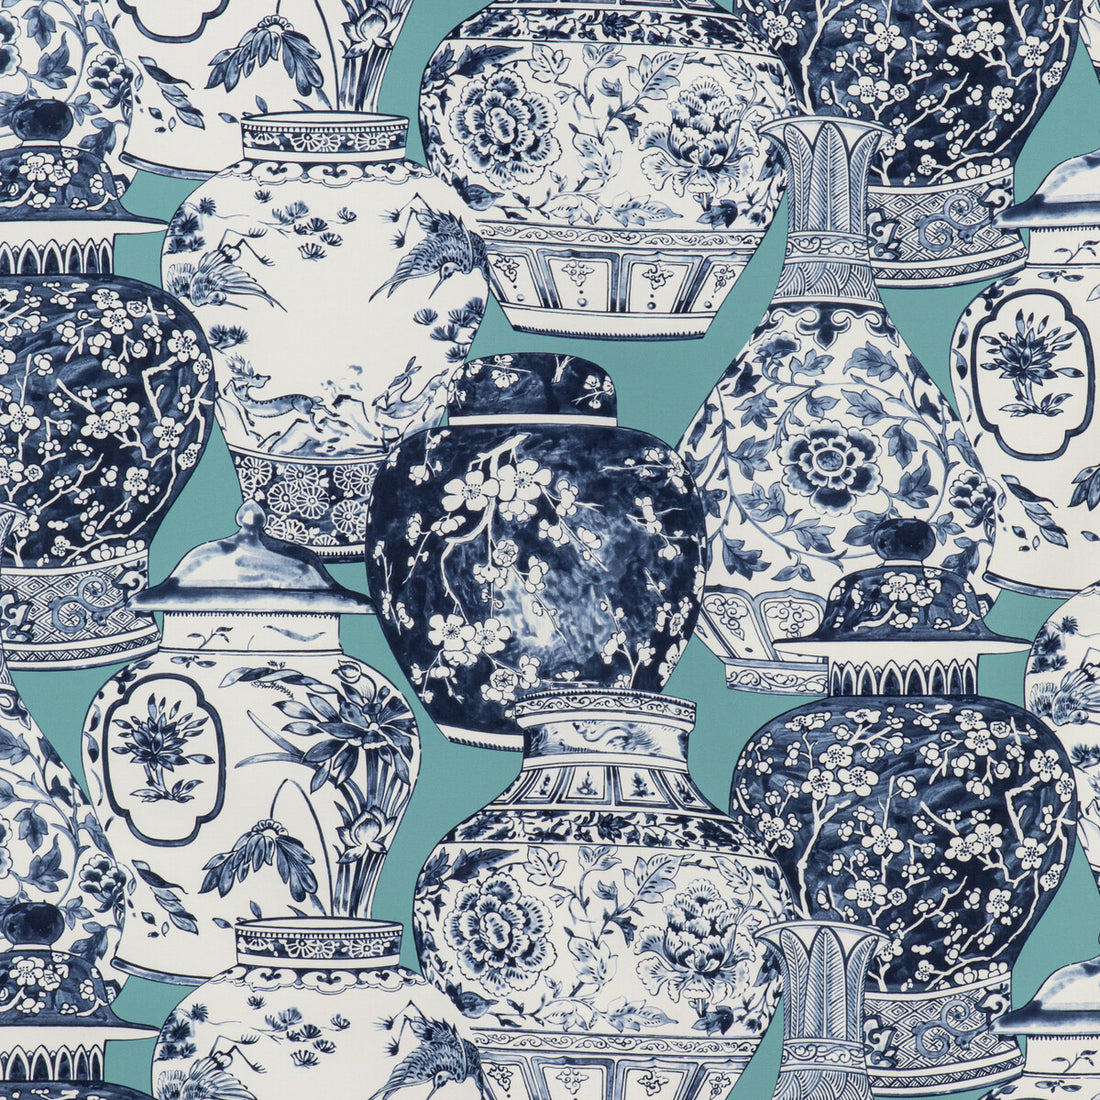 Pandan Print fabric in aqua/blue color - pattern 2020194.1350.0 - by Lee Jofa in the Mindoro collection